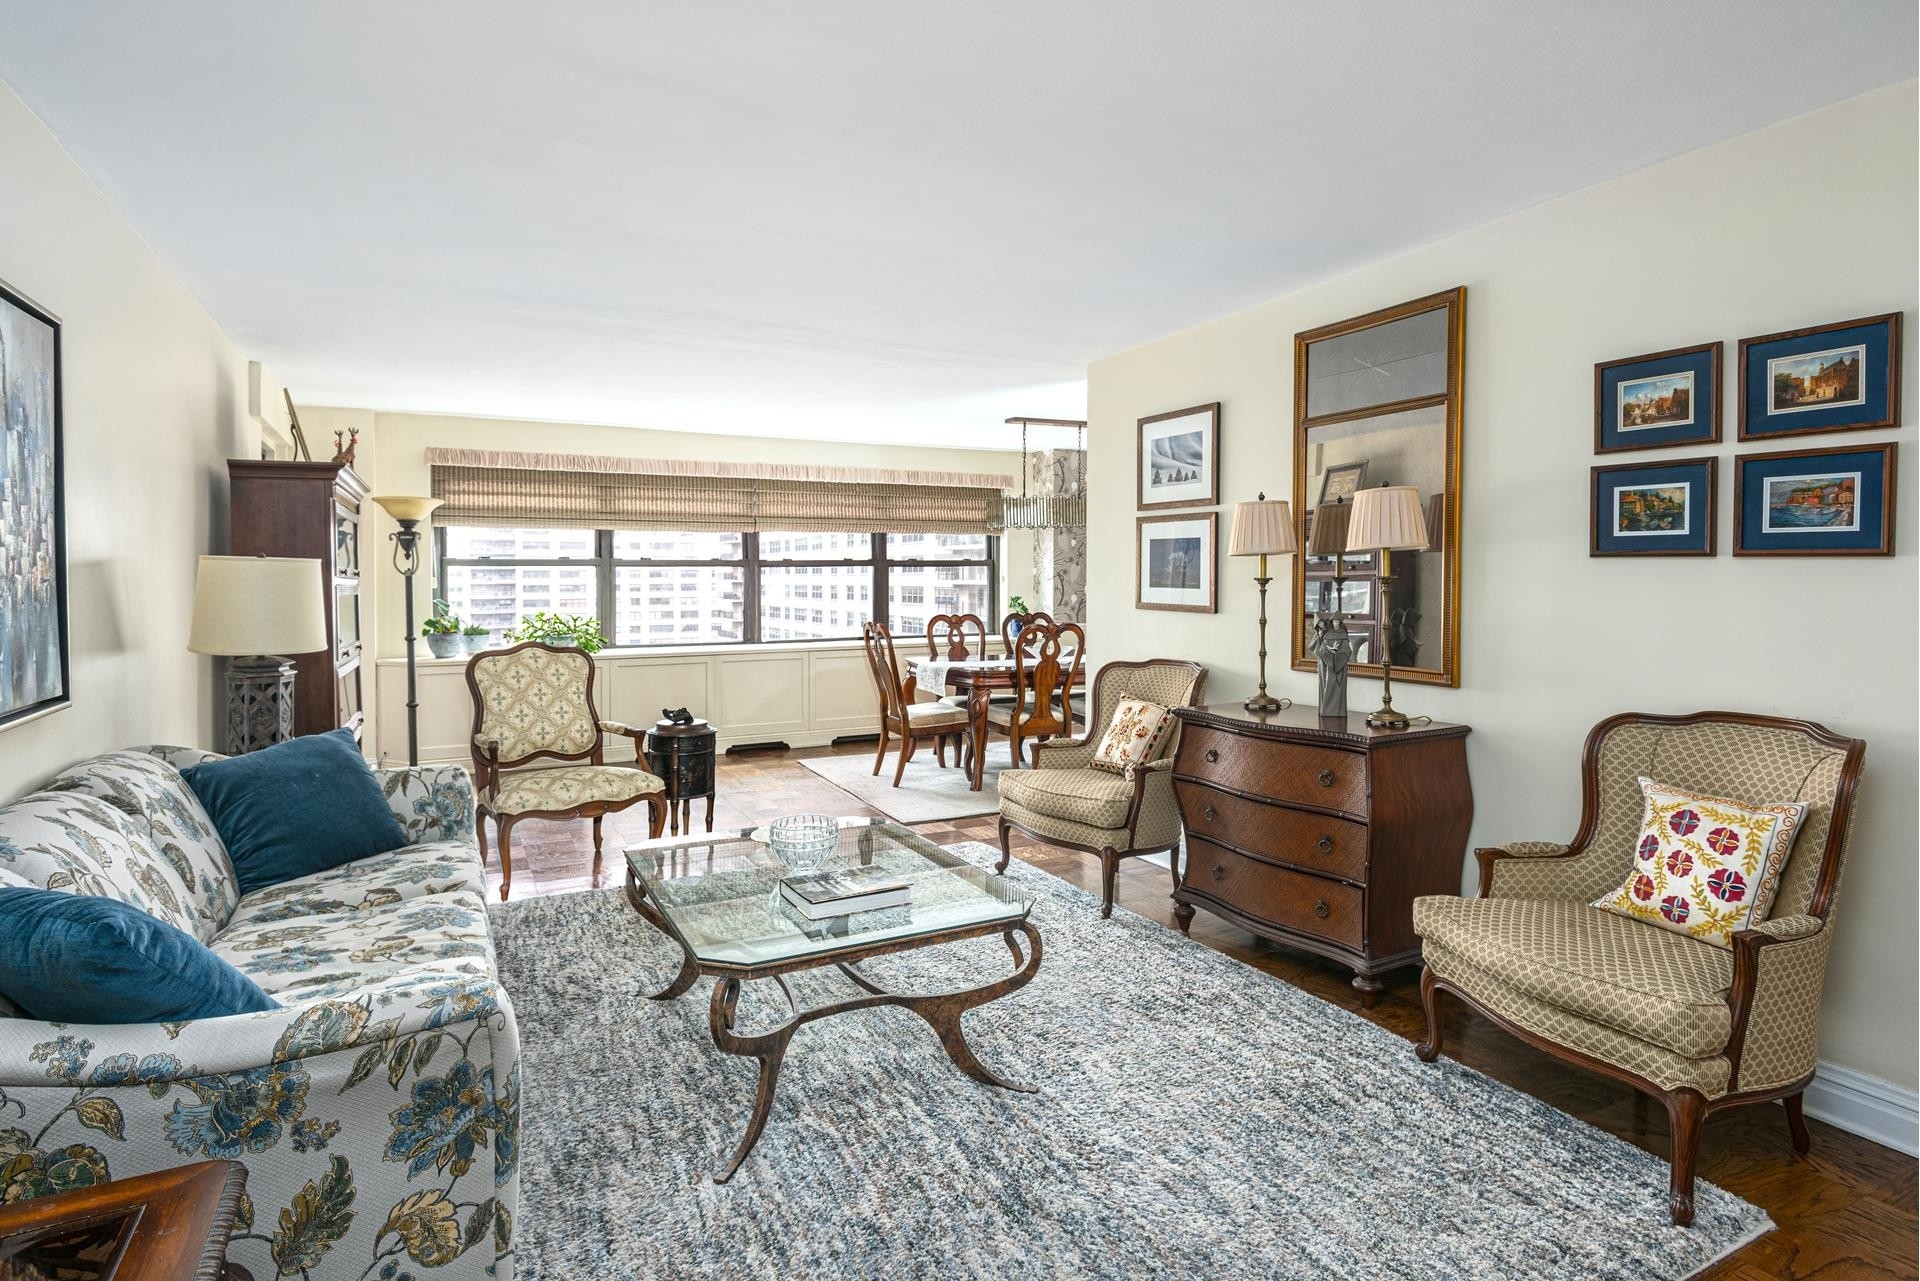 Co-op Properties for Sale at Lincoln Towers, 165 W END AVE, 15E Lincoln Square, New York, New York 10023